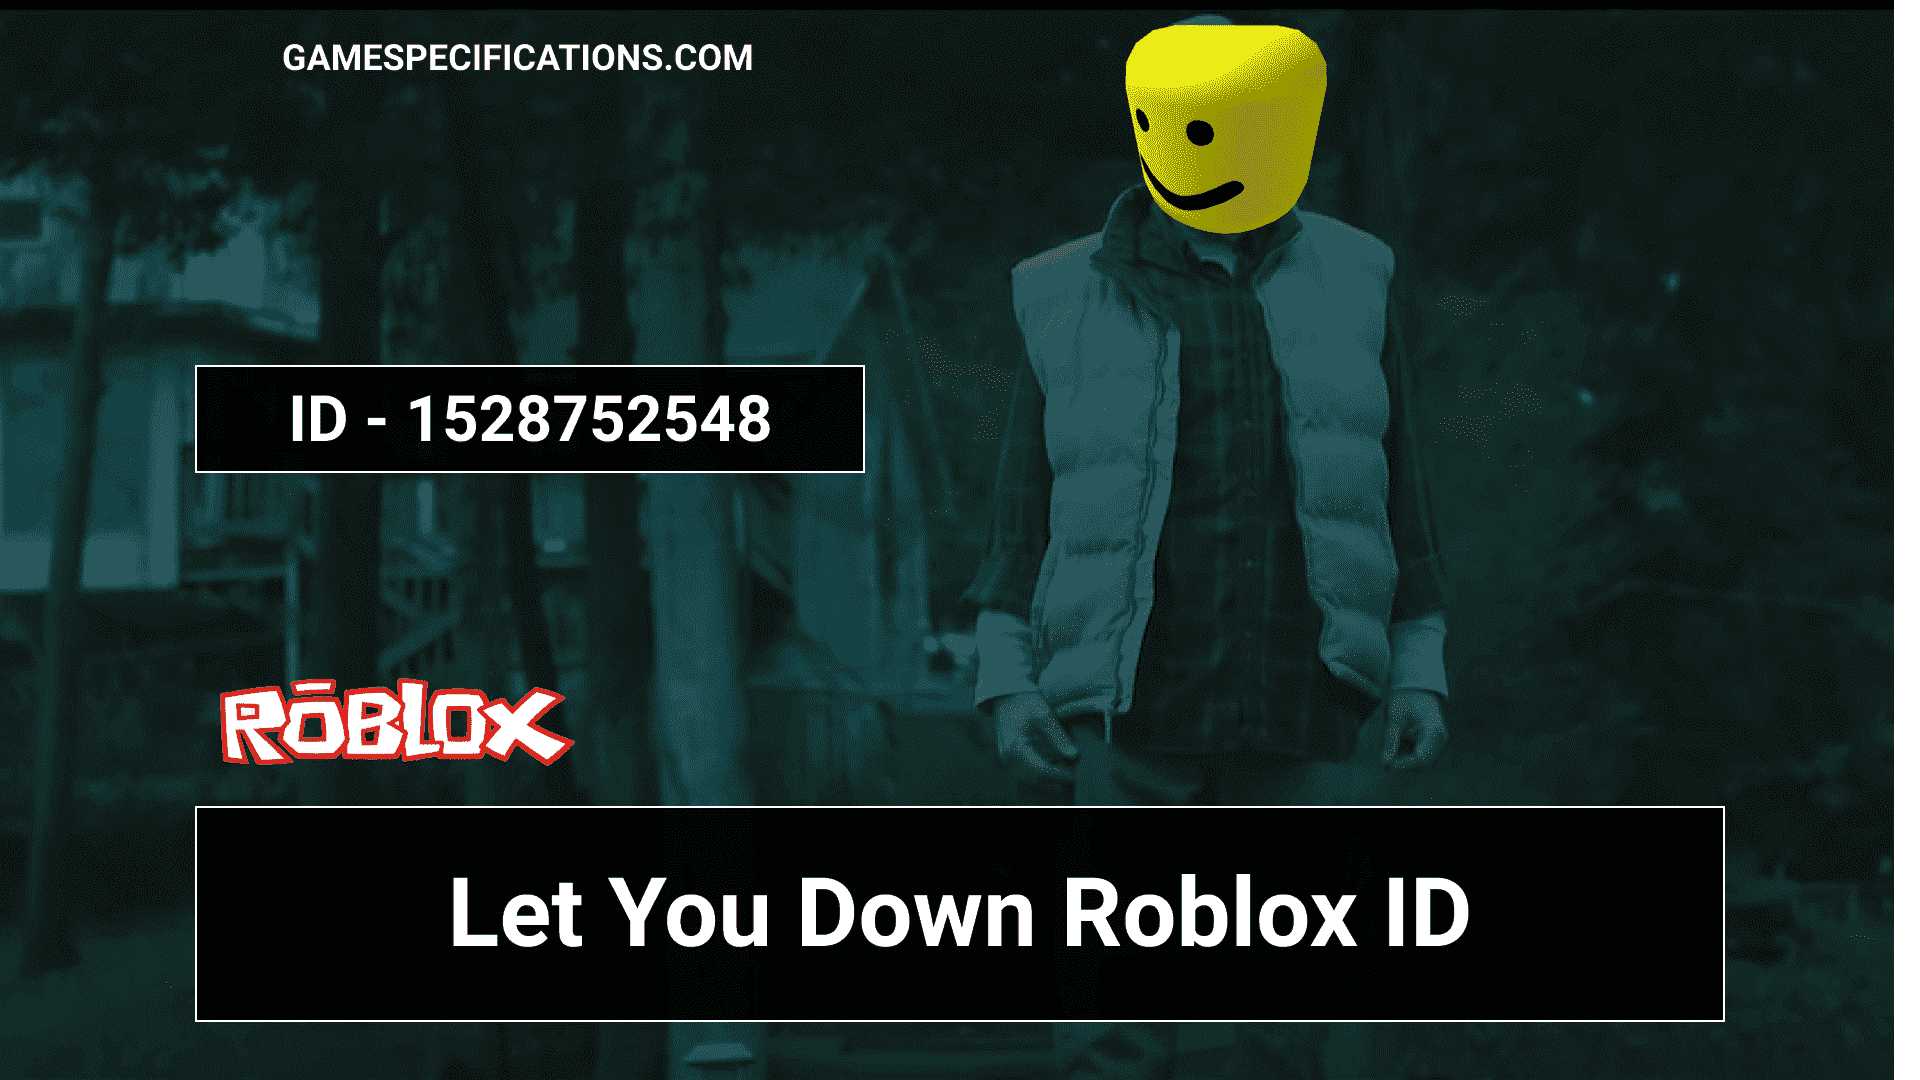 Let You Down Roblox Id Codes To Play The Nf Music 2021 Game Specifications - roblox audio wont play